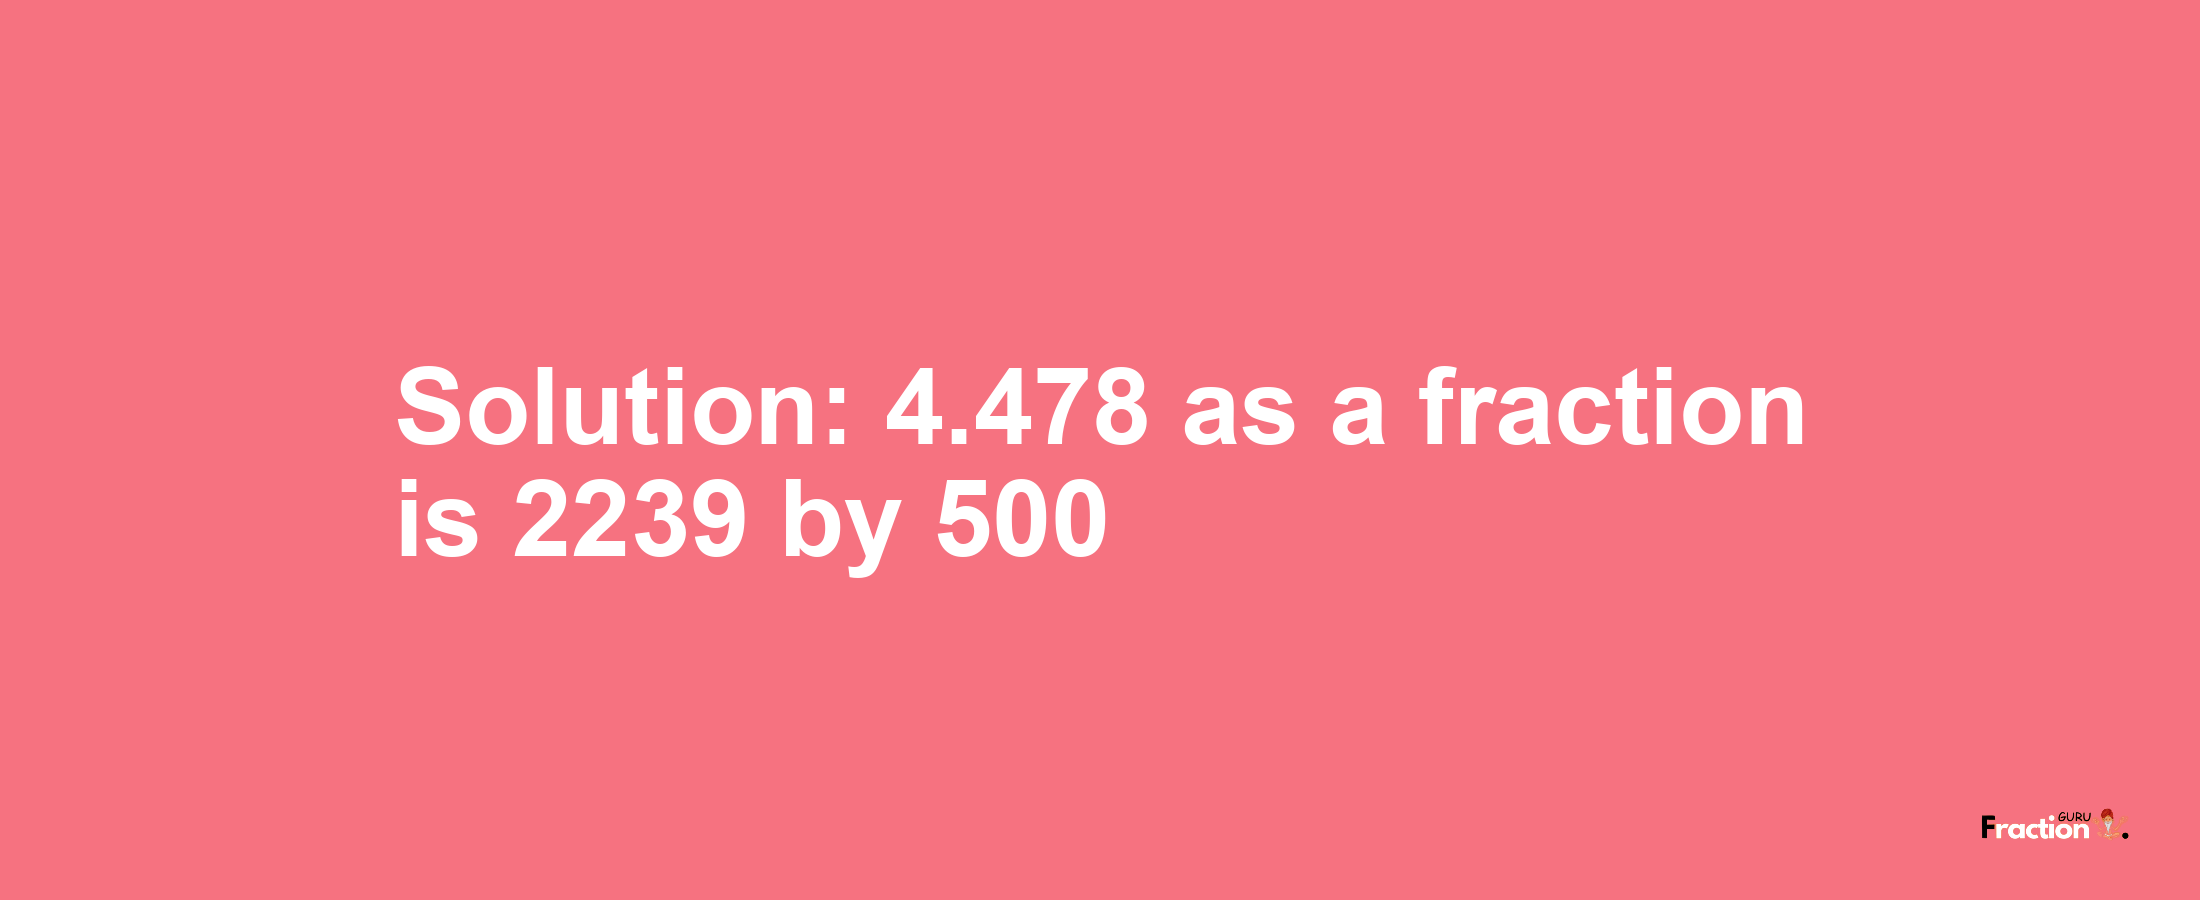 Solution:4.478 as a fraction is 2239/500